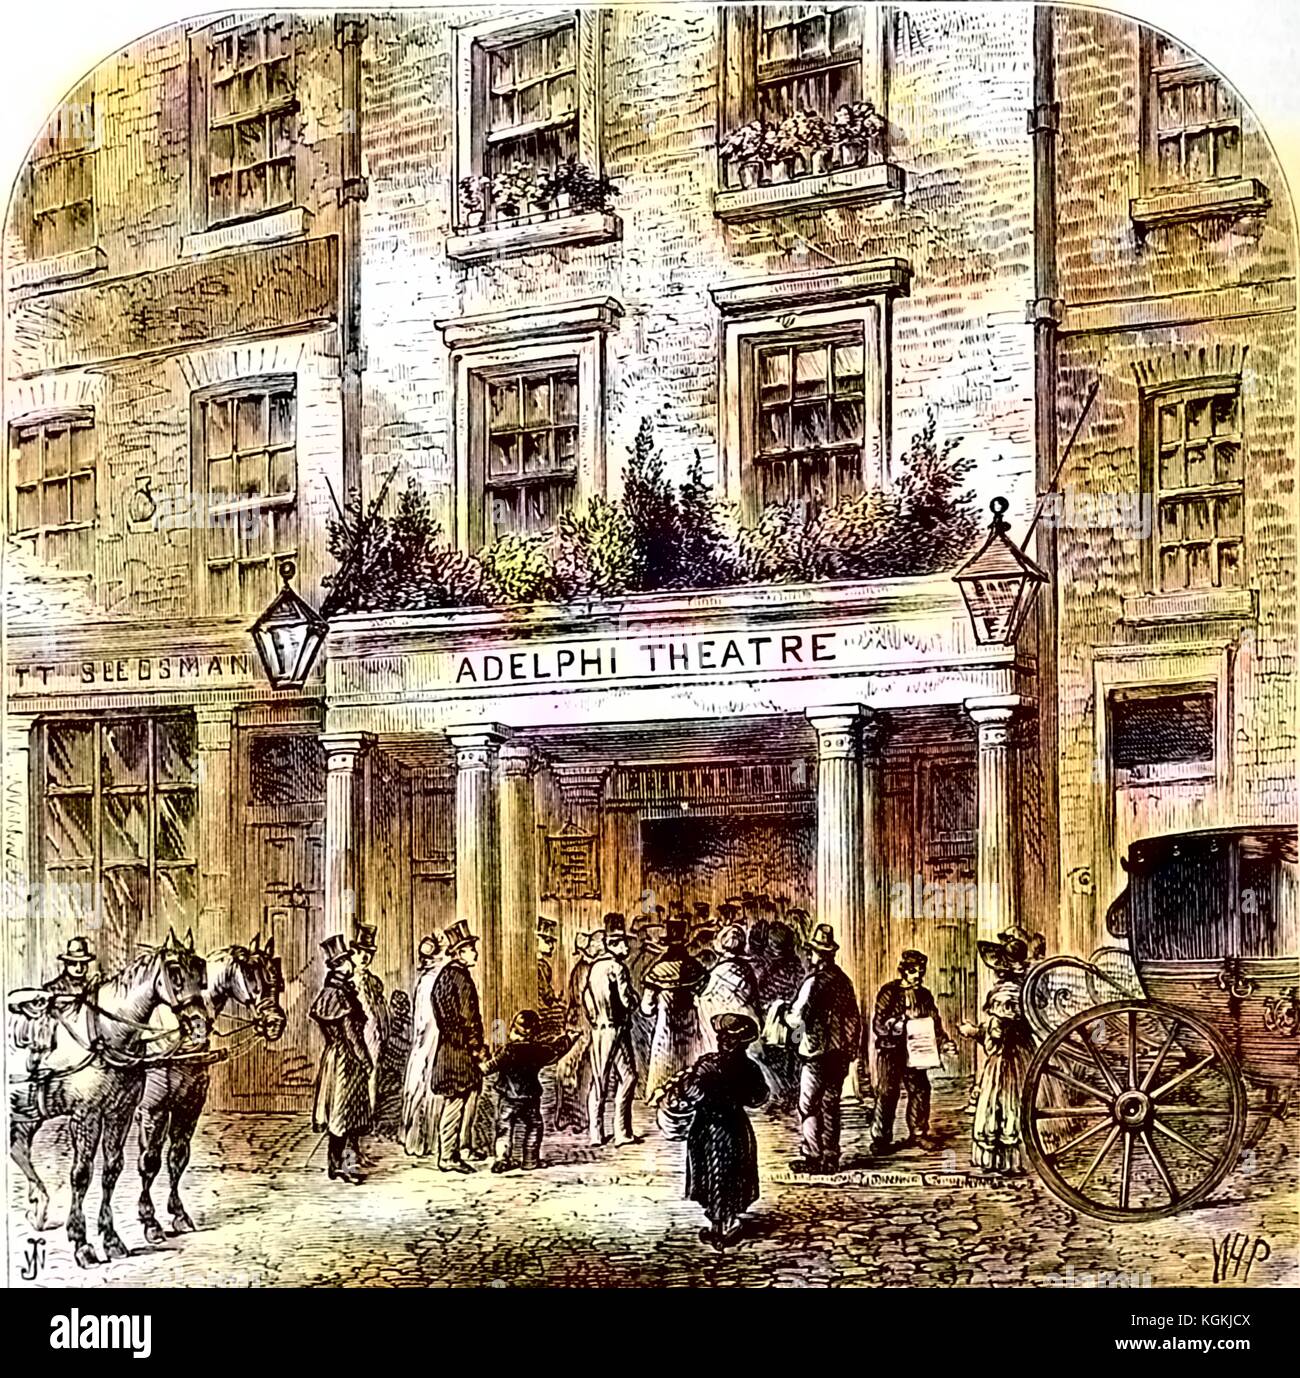 Engraving of the Old Adelphi Theatre, with crowd of well-dressed people in Victorian style clothing outdoors, on the Strand, Westminster, London, England, 1873. Courtesy Internet Archive. Note: Image has been digitally colorized using a modern process. Colors may not be period-accurate. Stock Photo